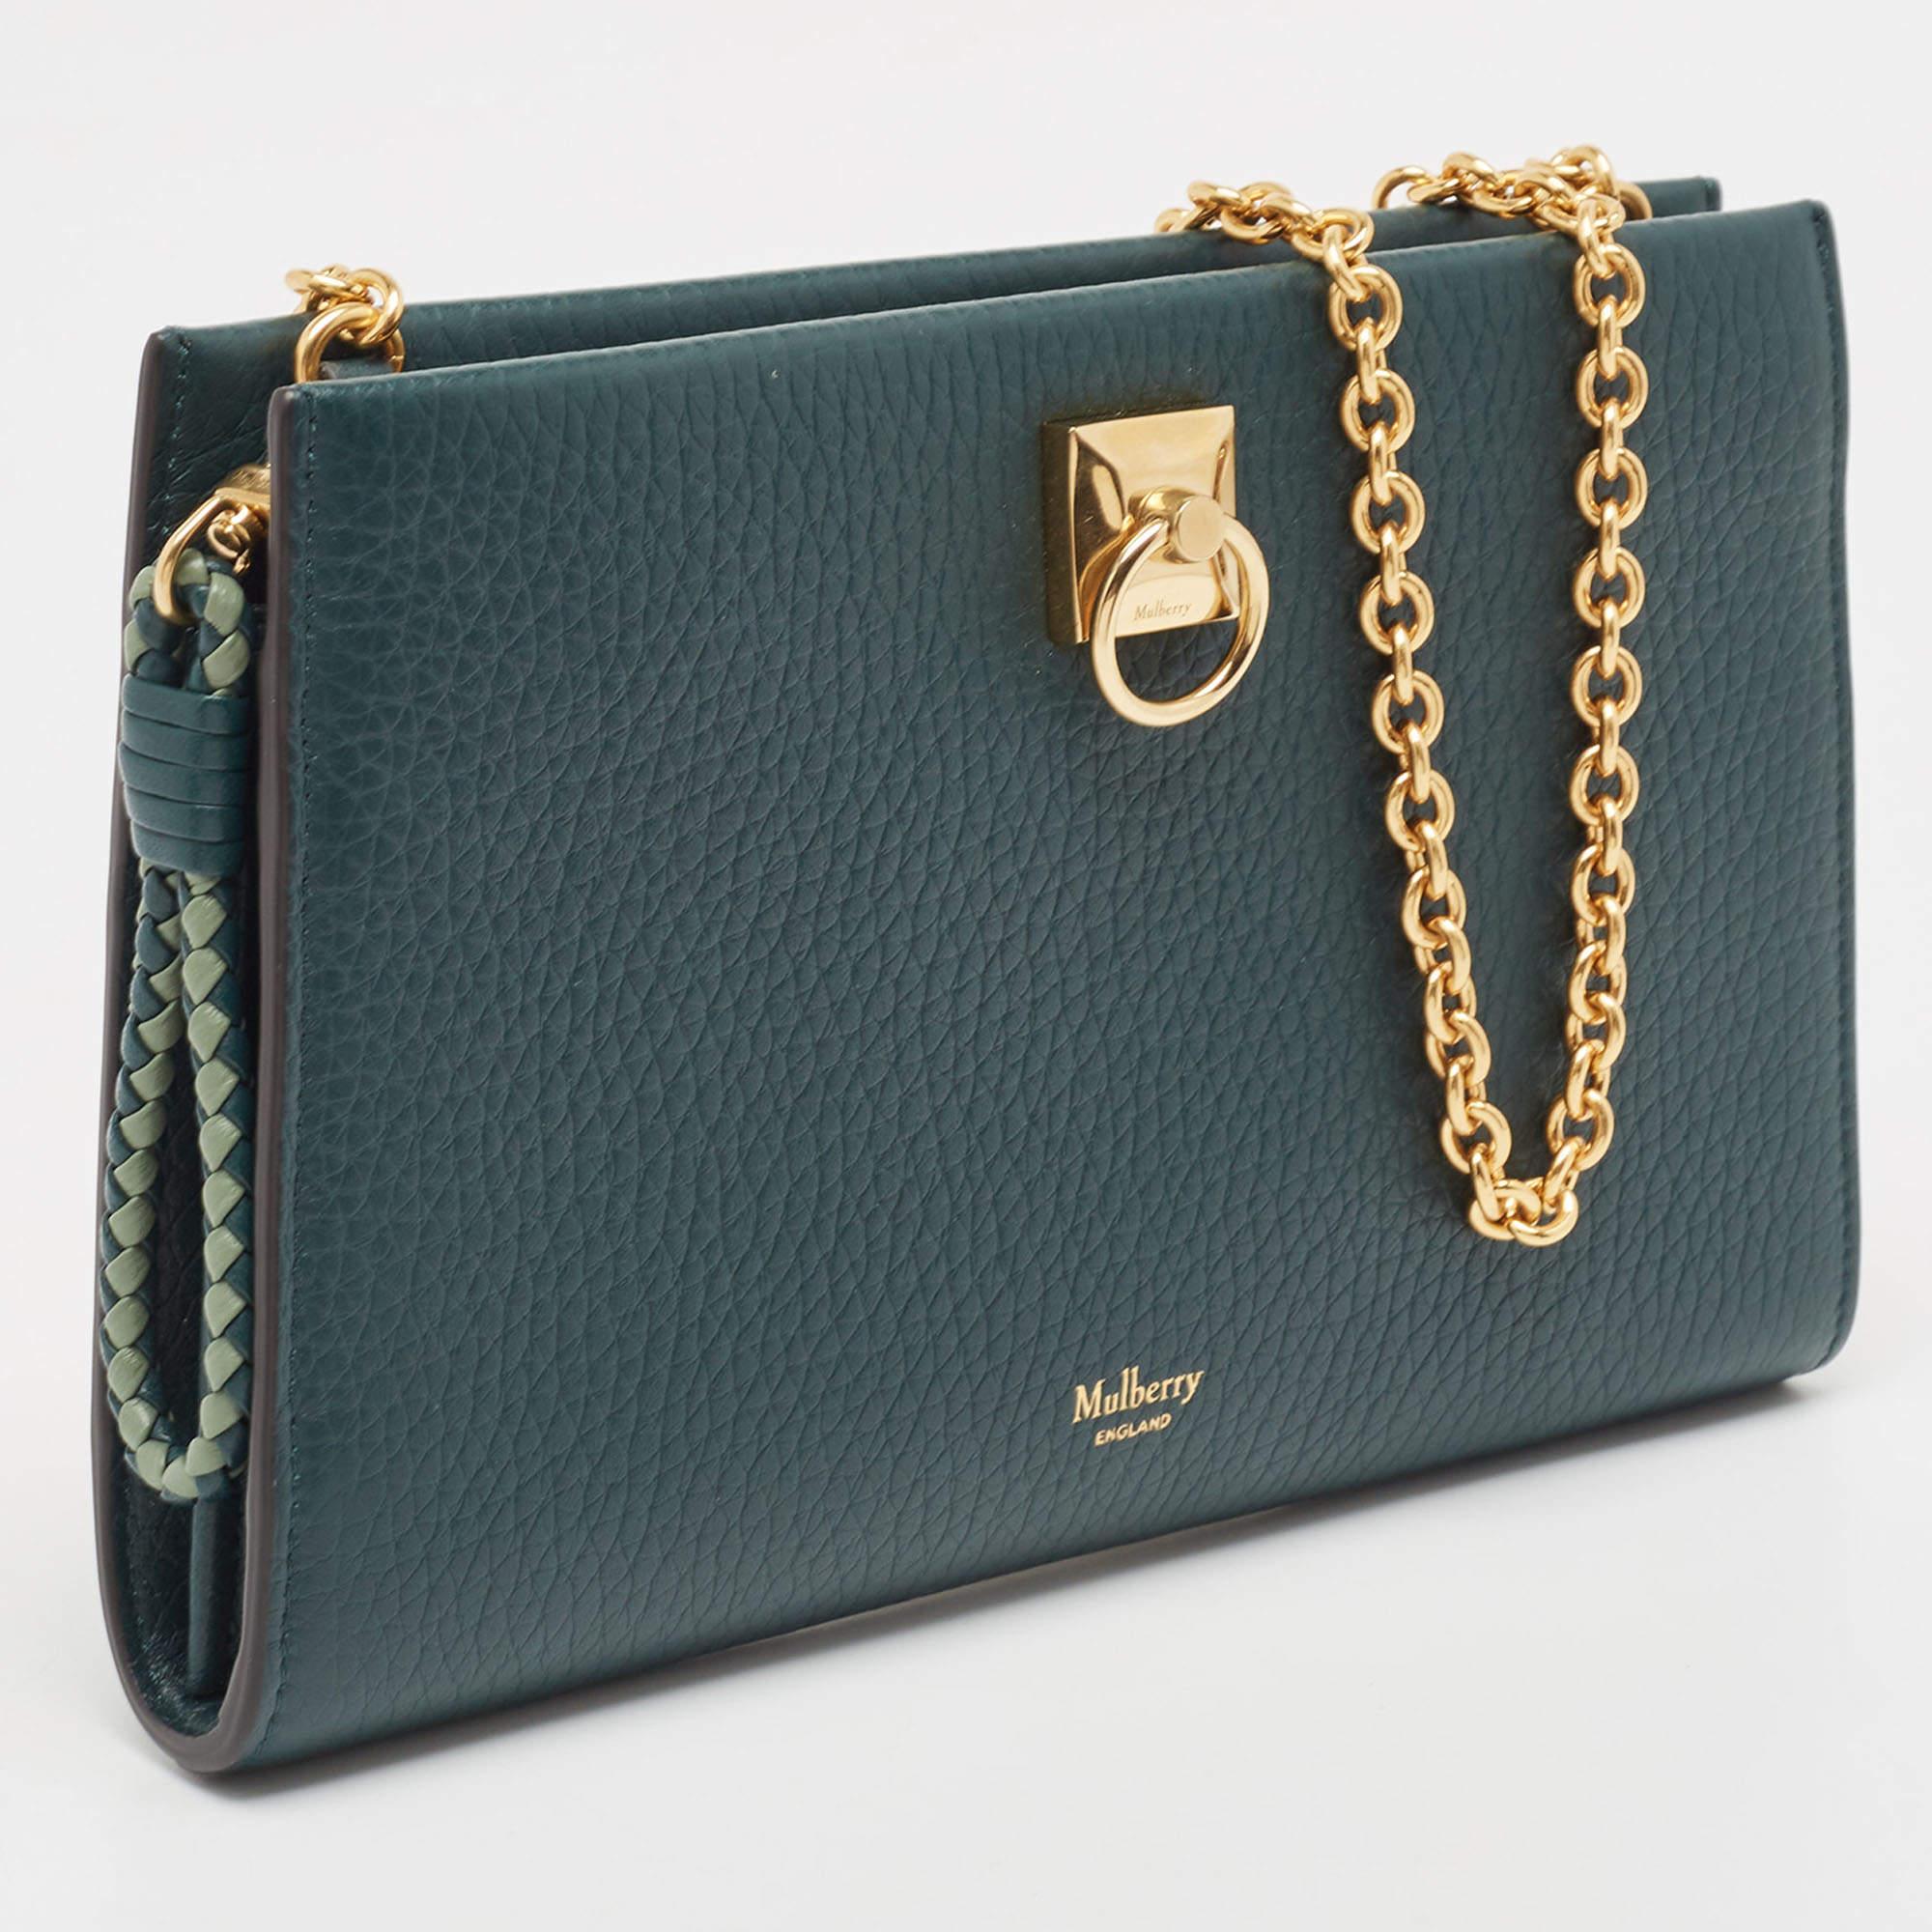 This Mulberry wallet on chain is conveniently designed for easy wear. It comes with a well-spaced interior for you to arrange your cards and cash neatly. This stylish piece is complete with a chain link.

Includes: Original Dustbag, Info Booklet,